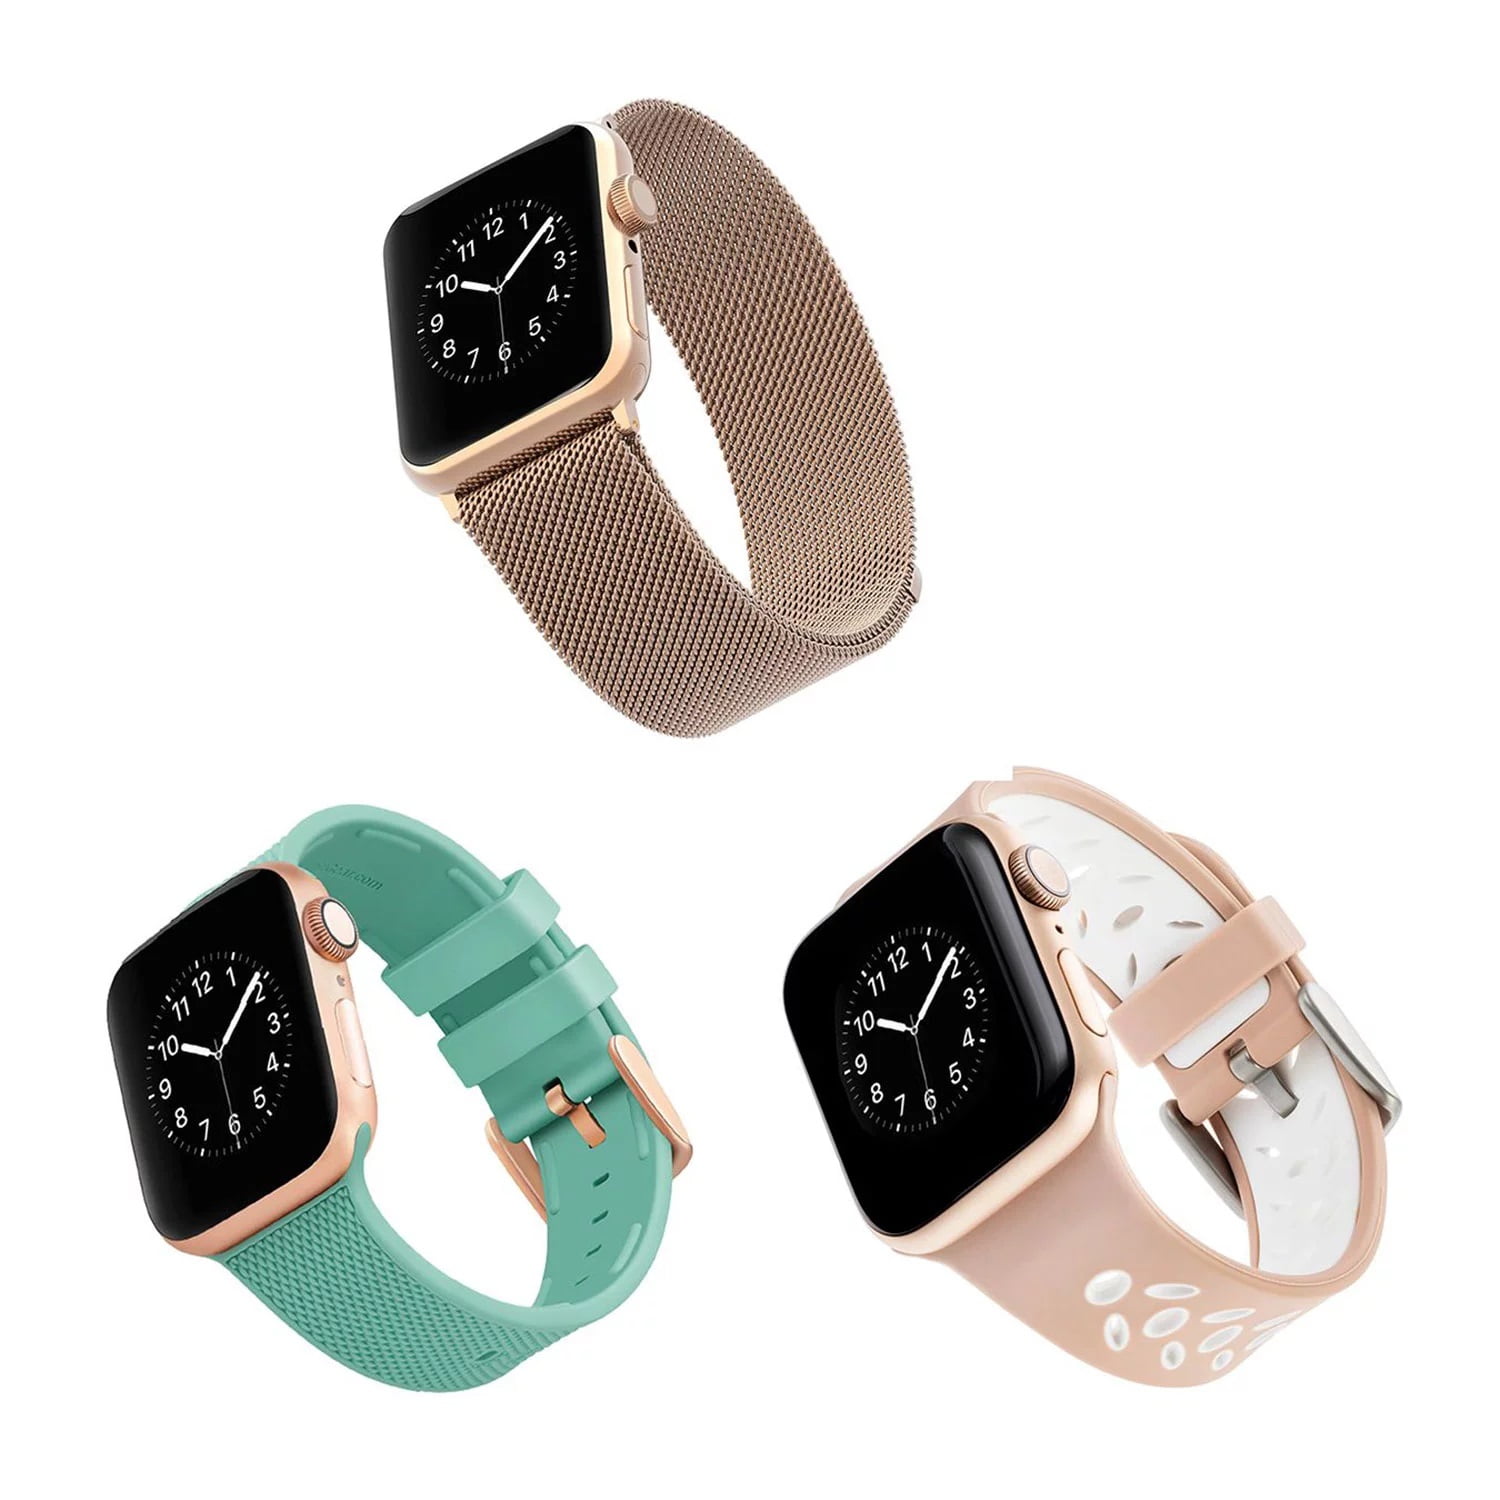 WITHit Bands for 38mm or 40mm Apple Watch, 3 Pack - Walmart.com